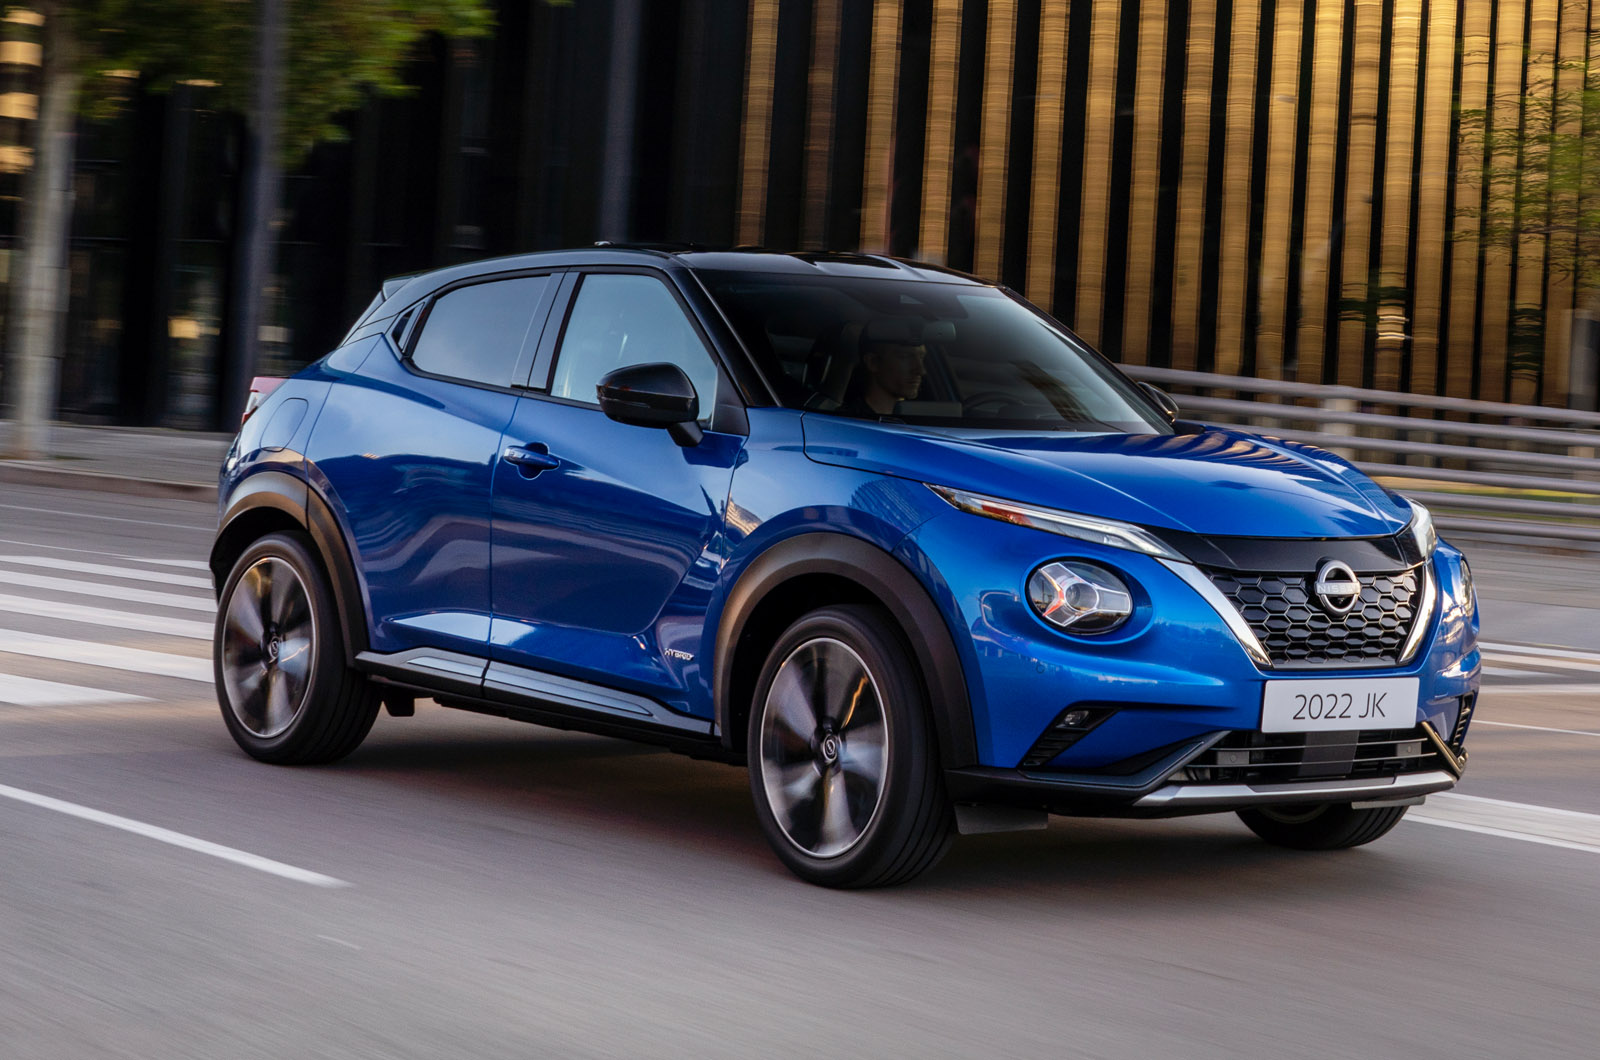 New Nissan Juke Hybrid opens for order at £27,250 Autocar